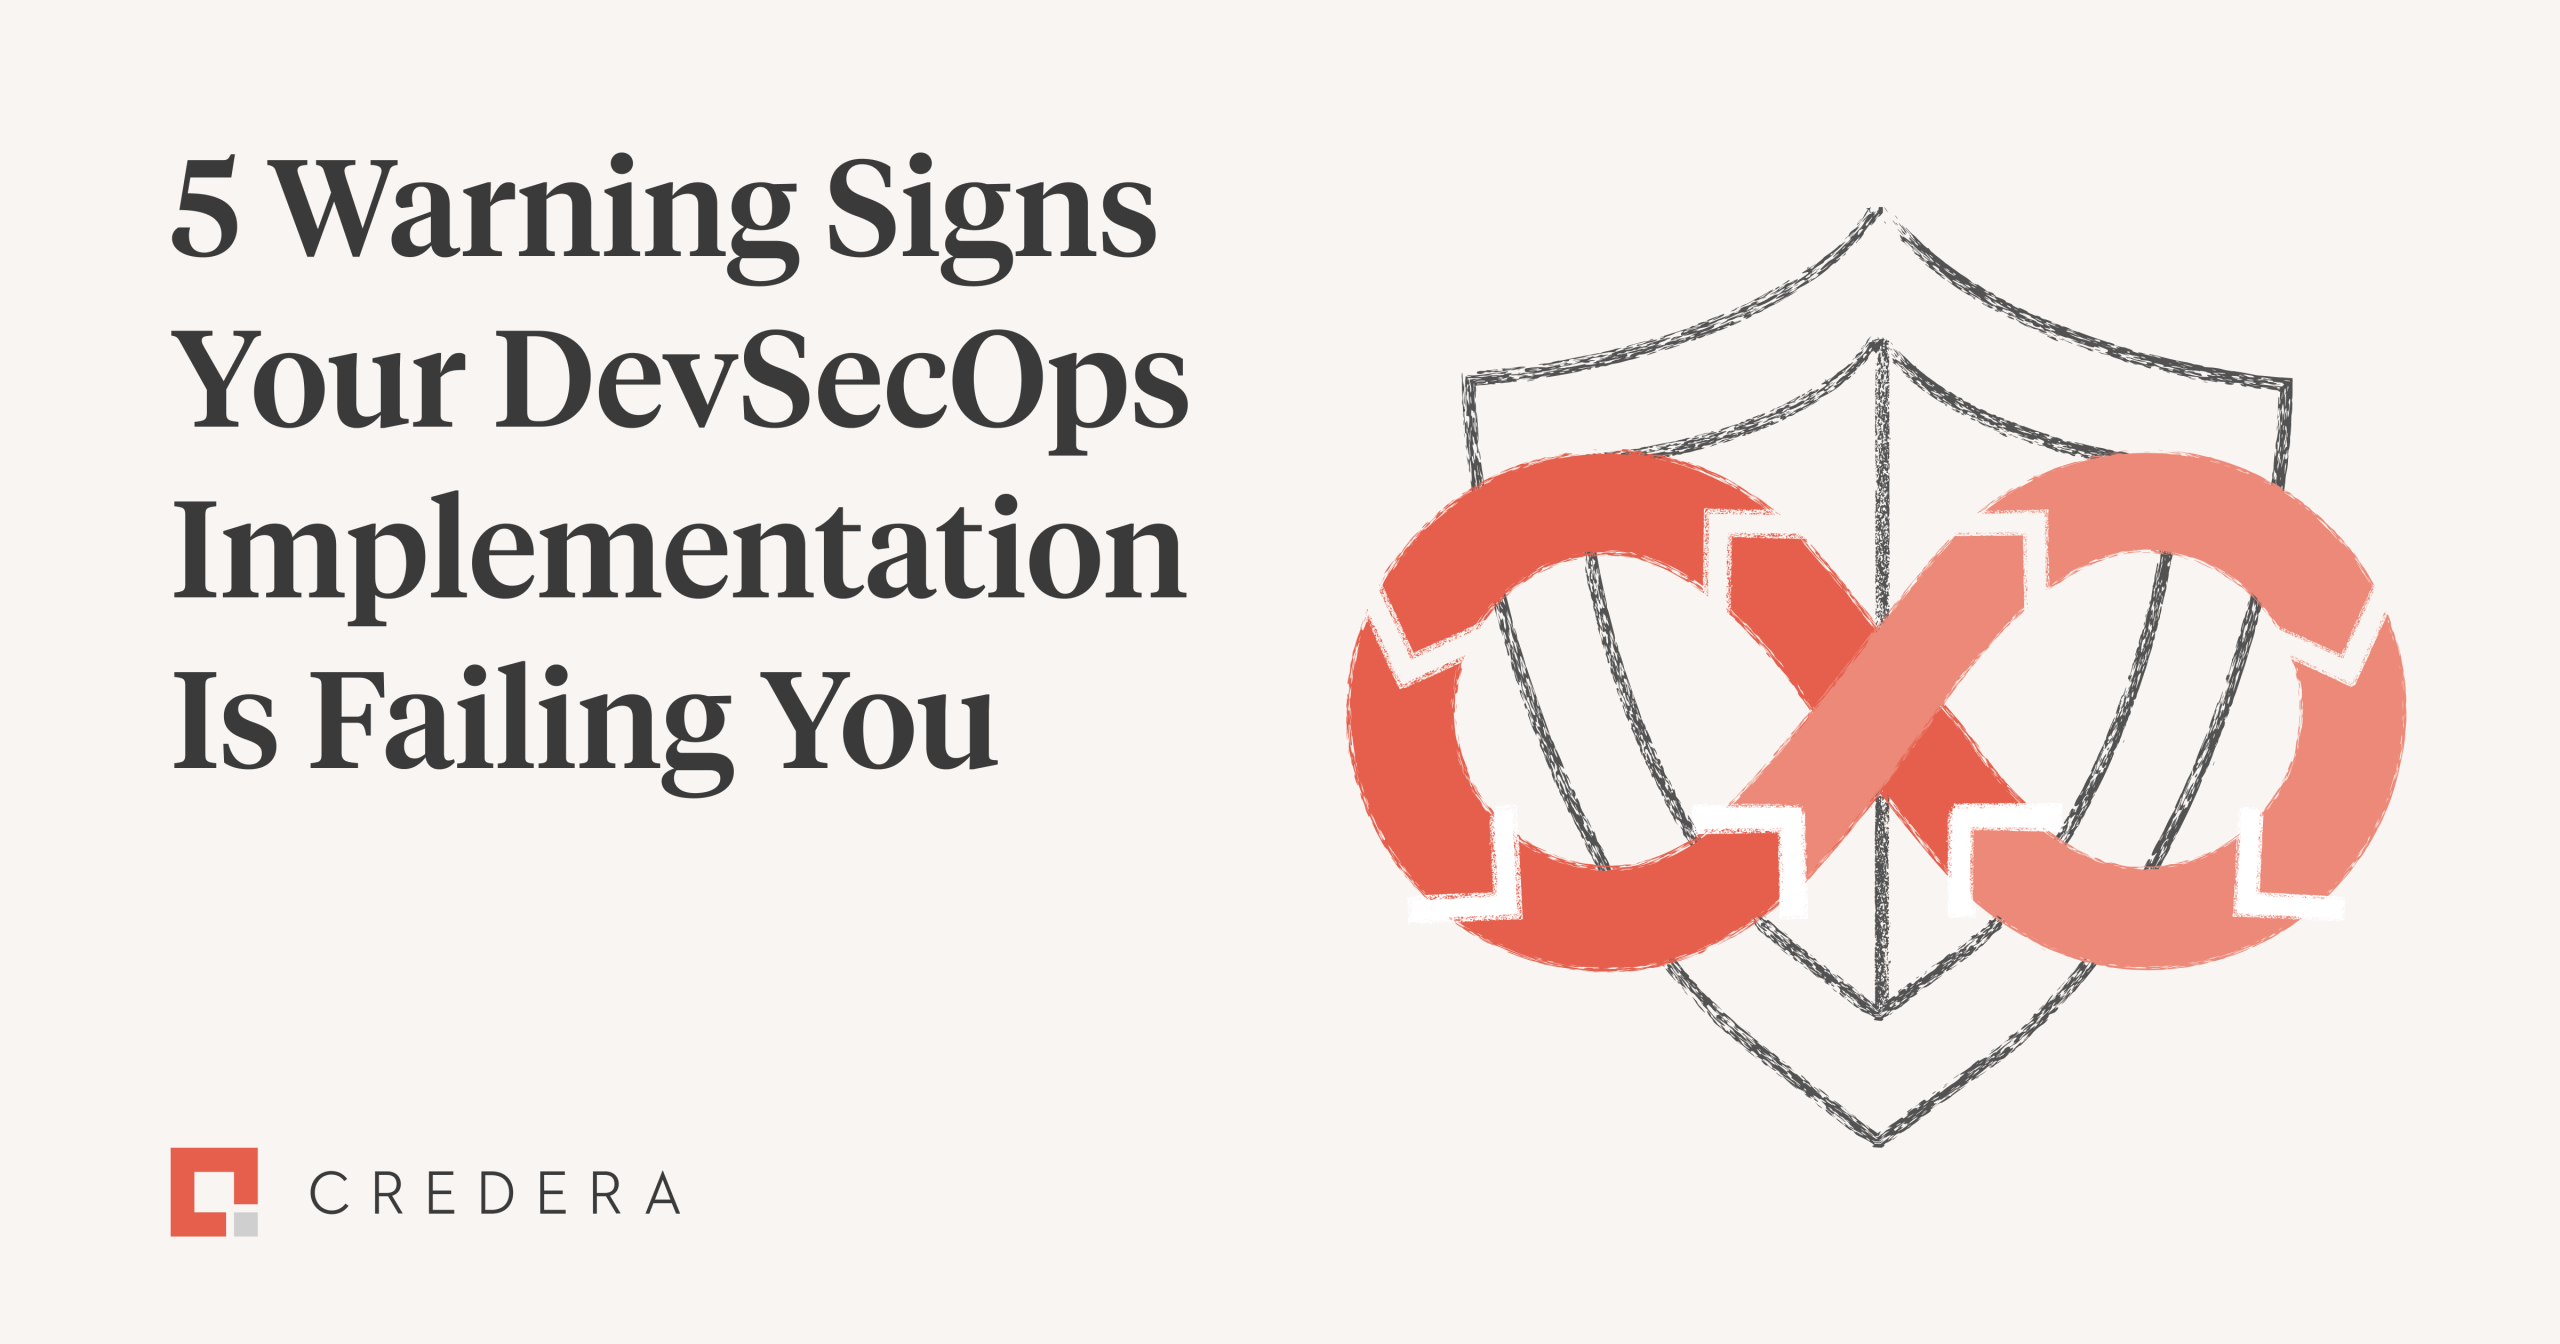 5 Warning Signs Your DevSecOps Implementation Is Failing You